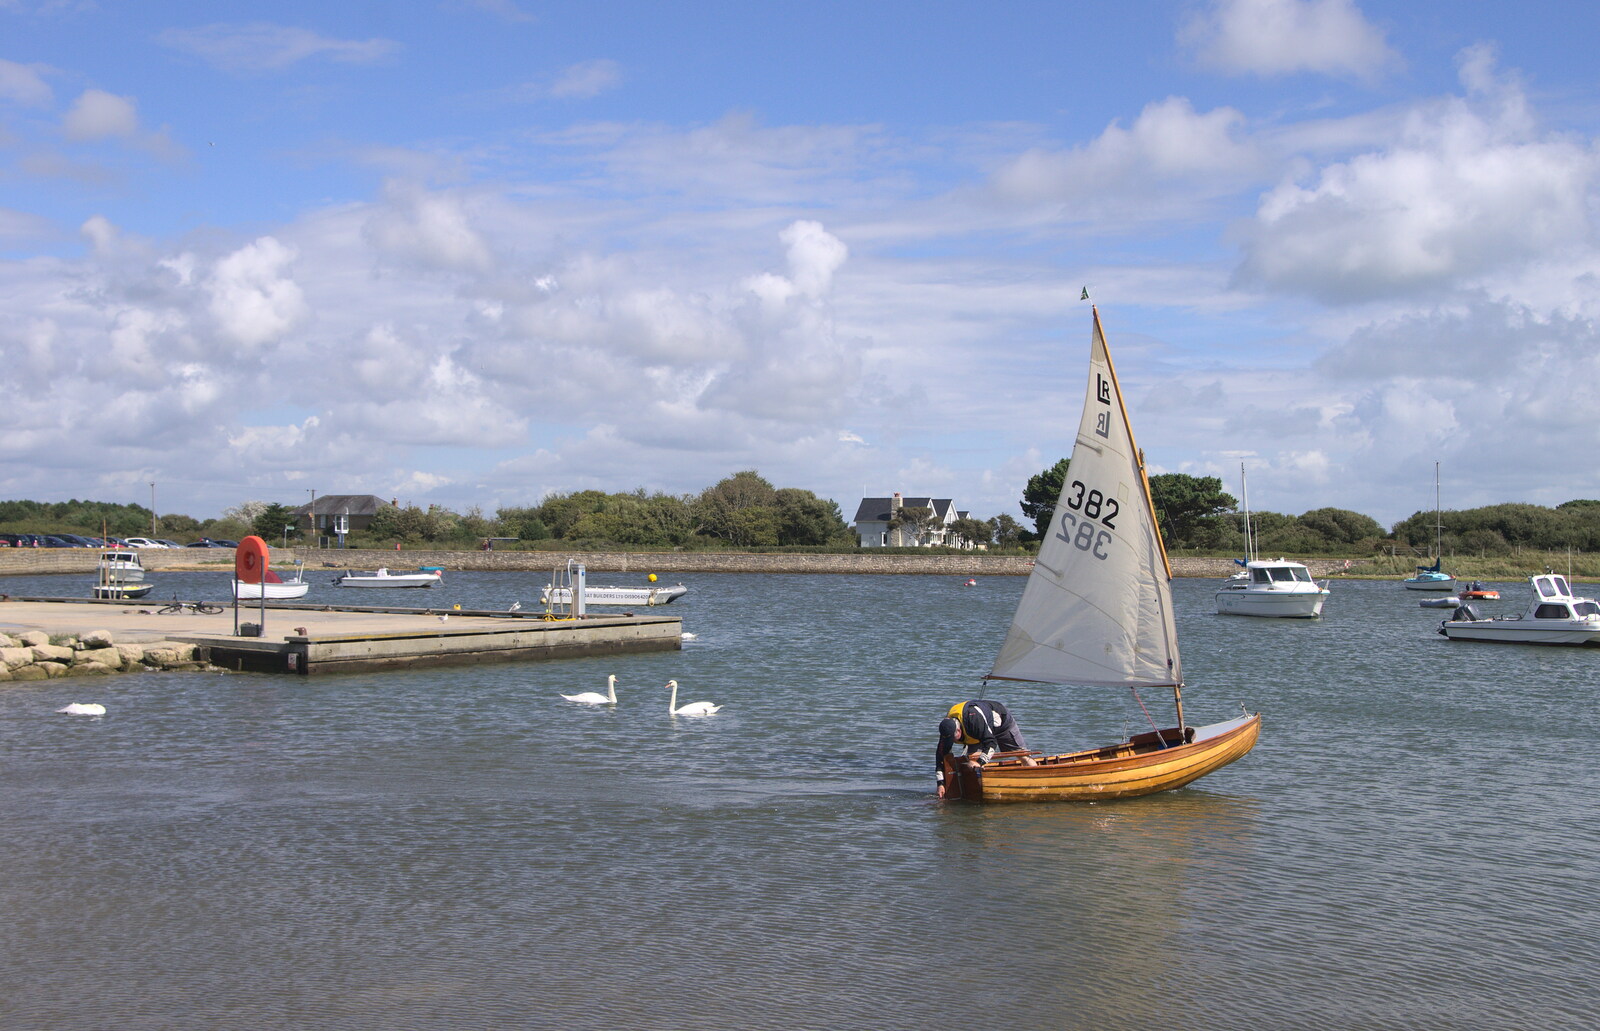 The wooden dinghy heads out from A Trip to Hurst Castle, Keyhaven, Hampshire - 28th August 2015